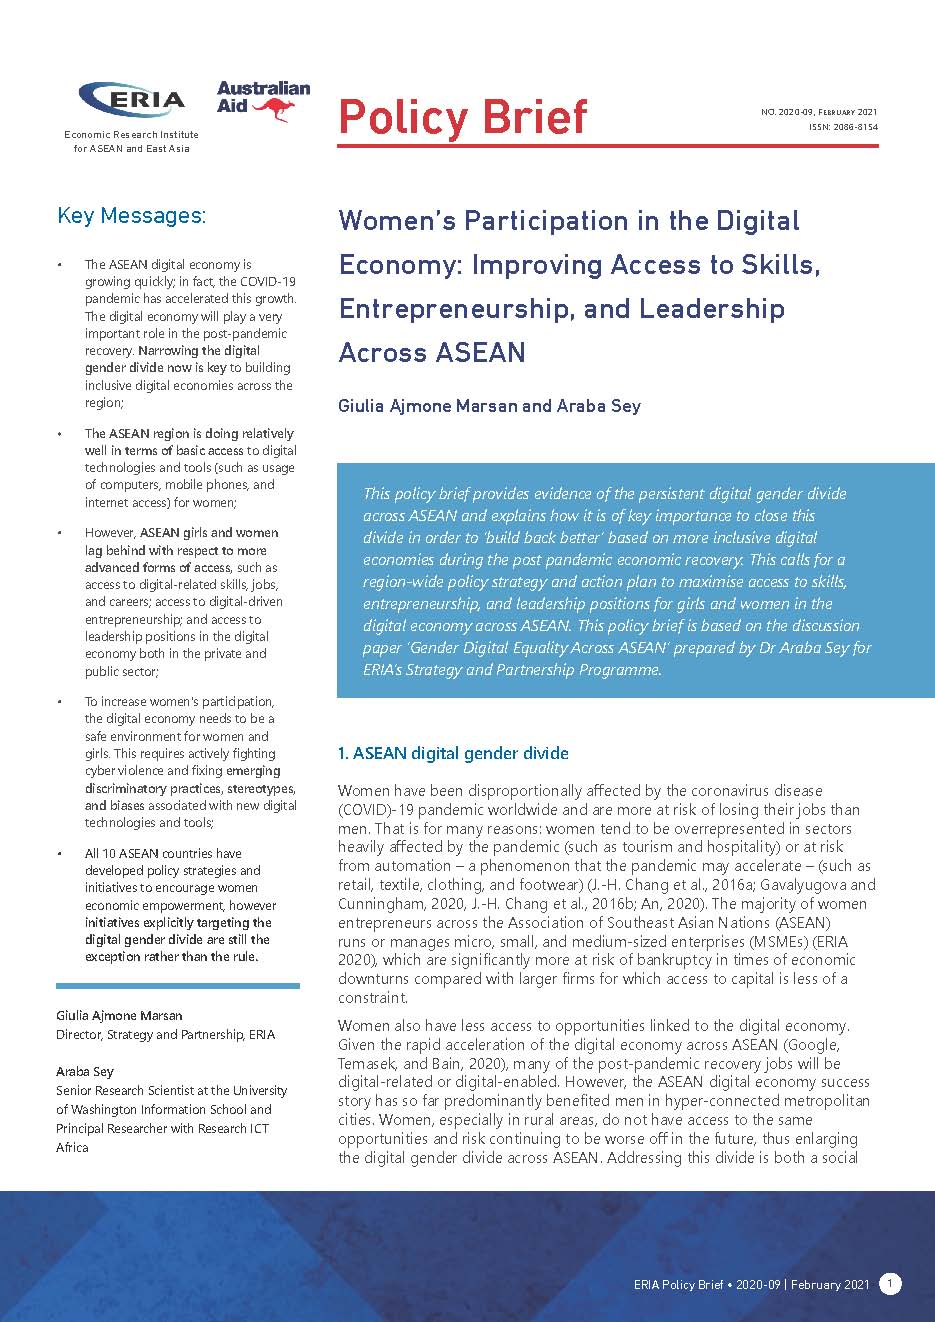 Women’s Participation in the Digital Economy: Improving Access to Skills, Entrepreneurship, and Leadership Across ASEAN